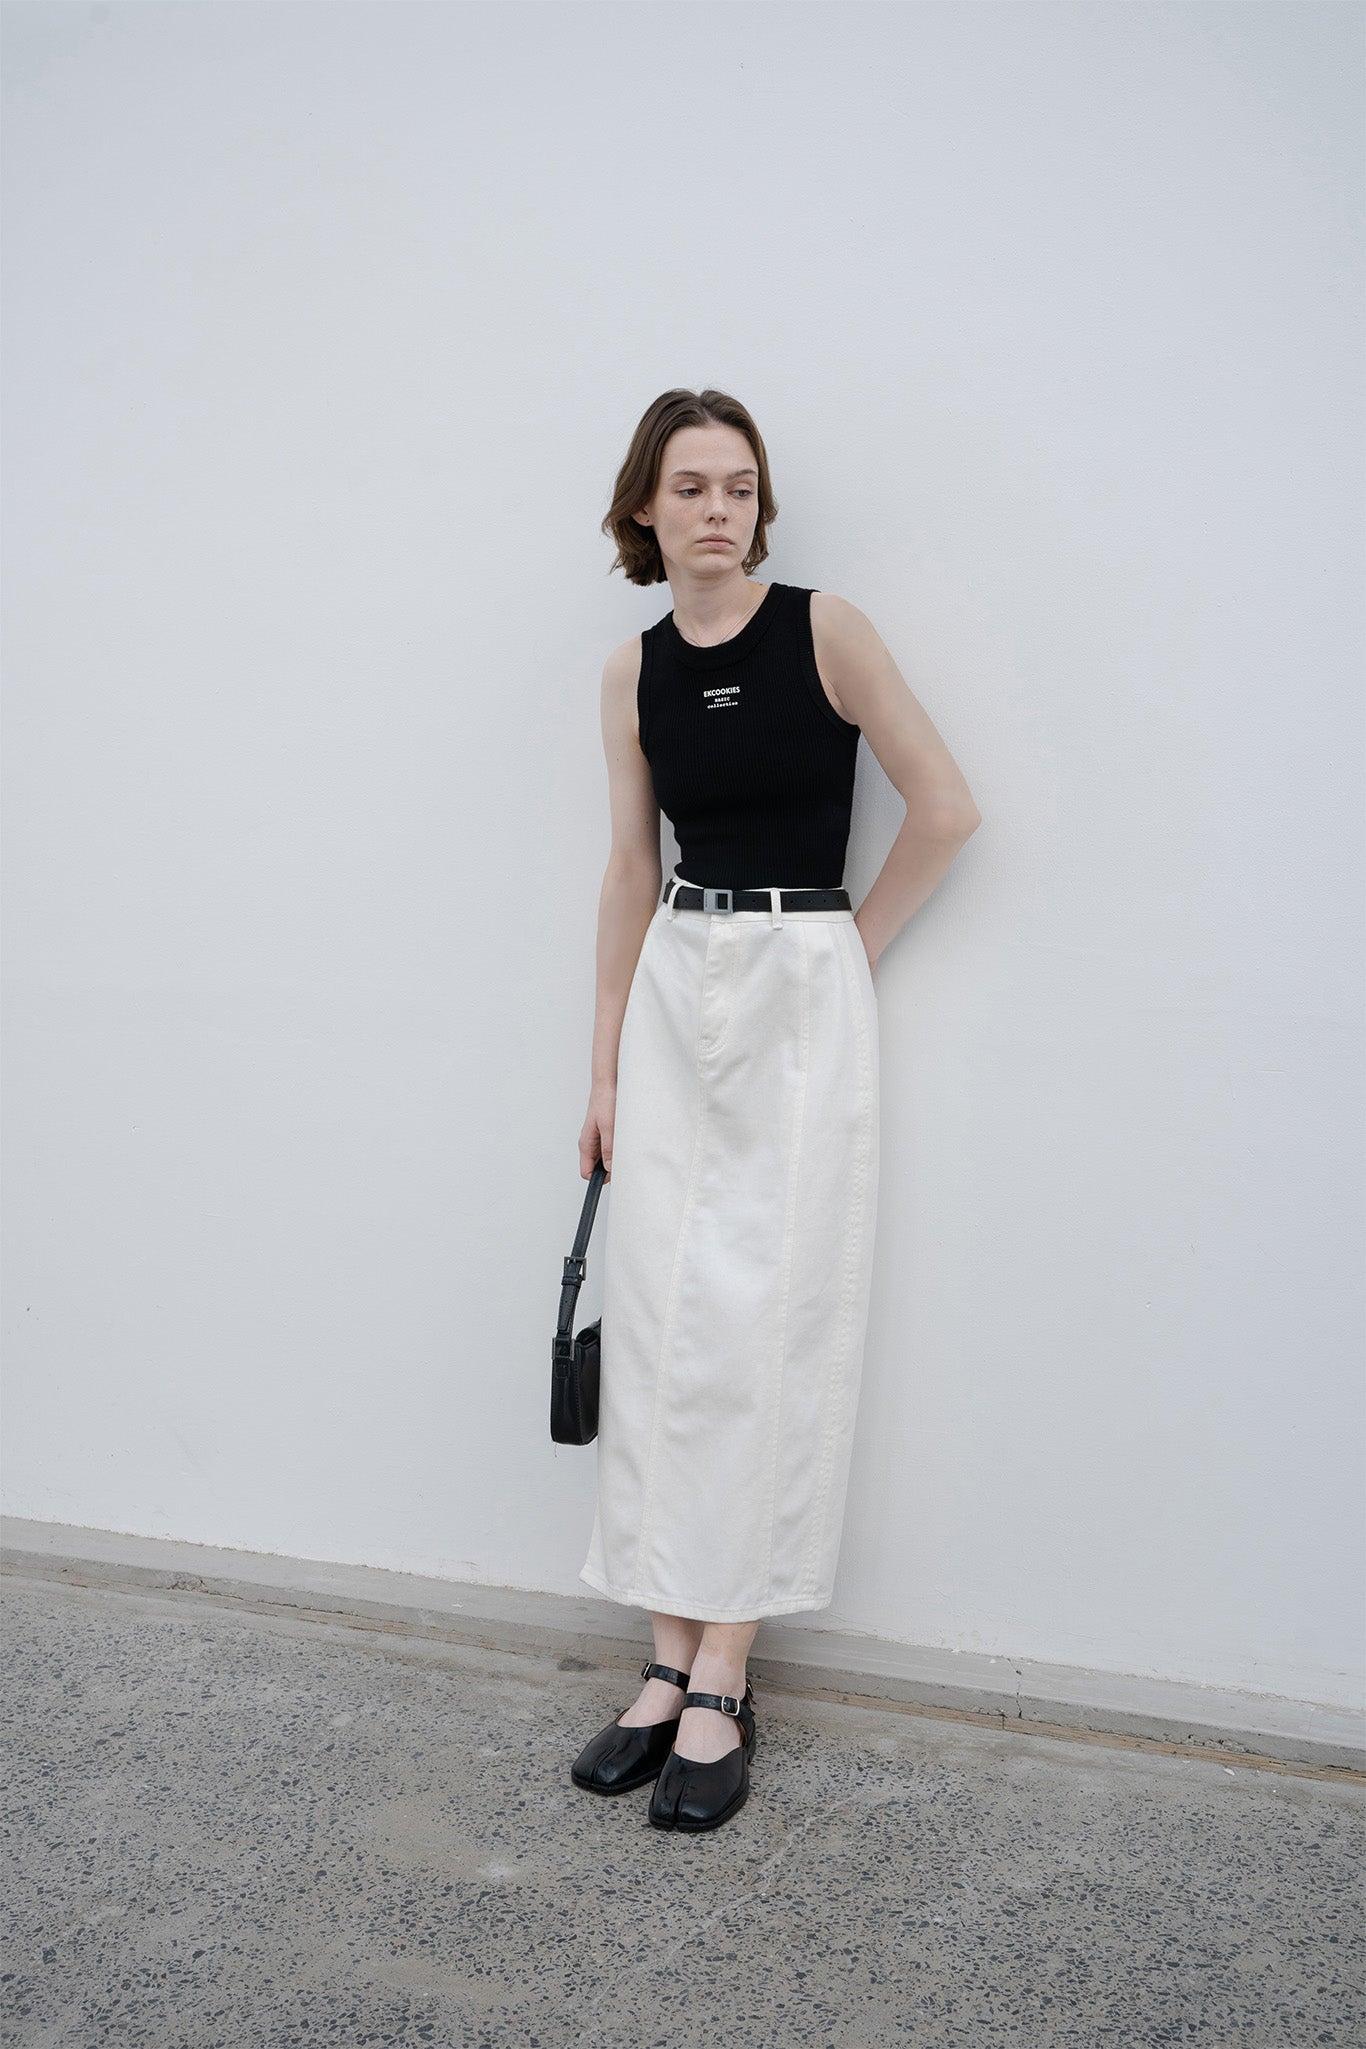 Straight cotton skirt with slit / maxi length 